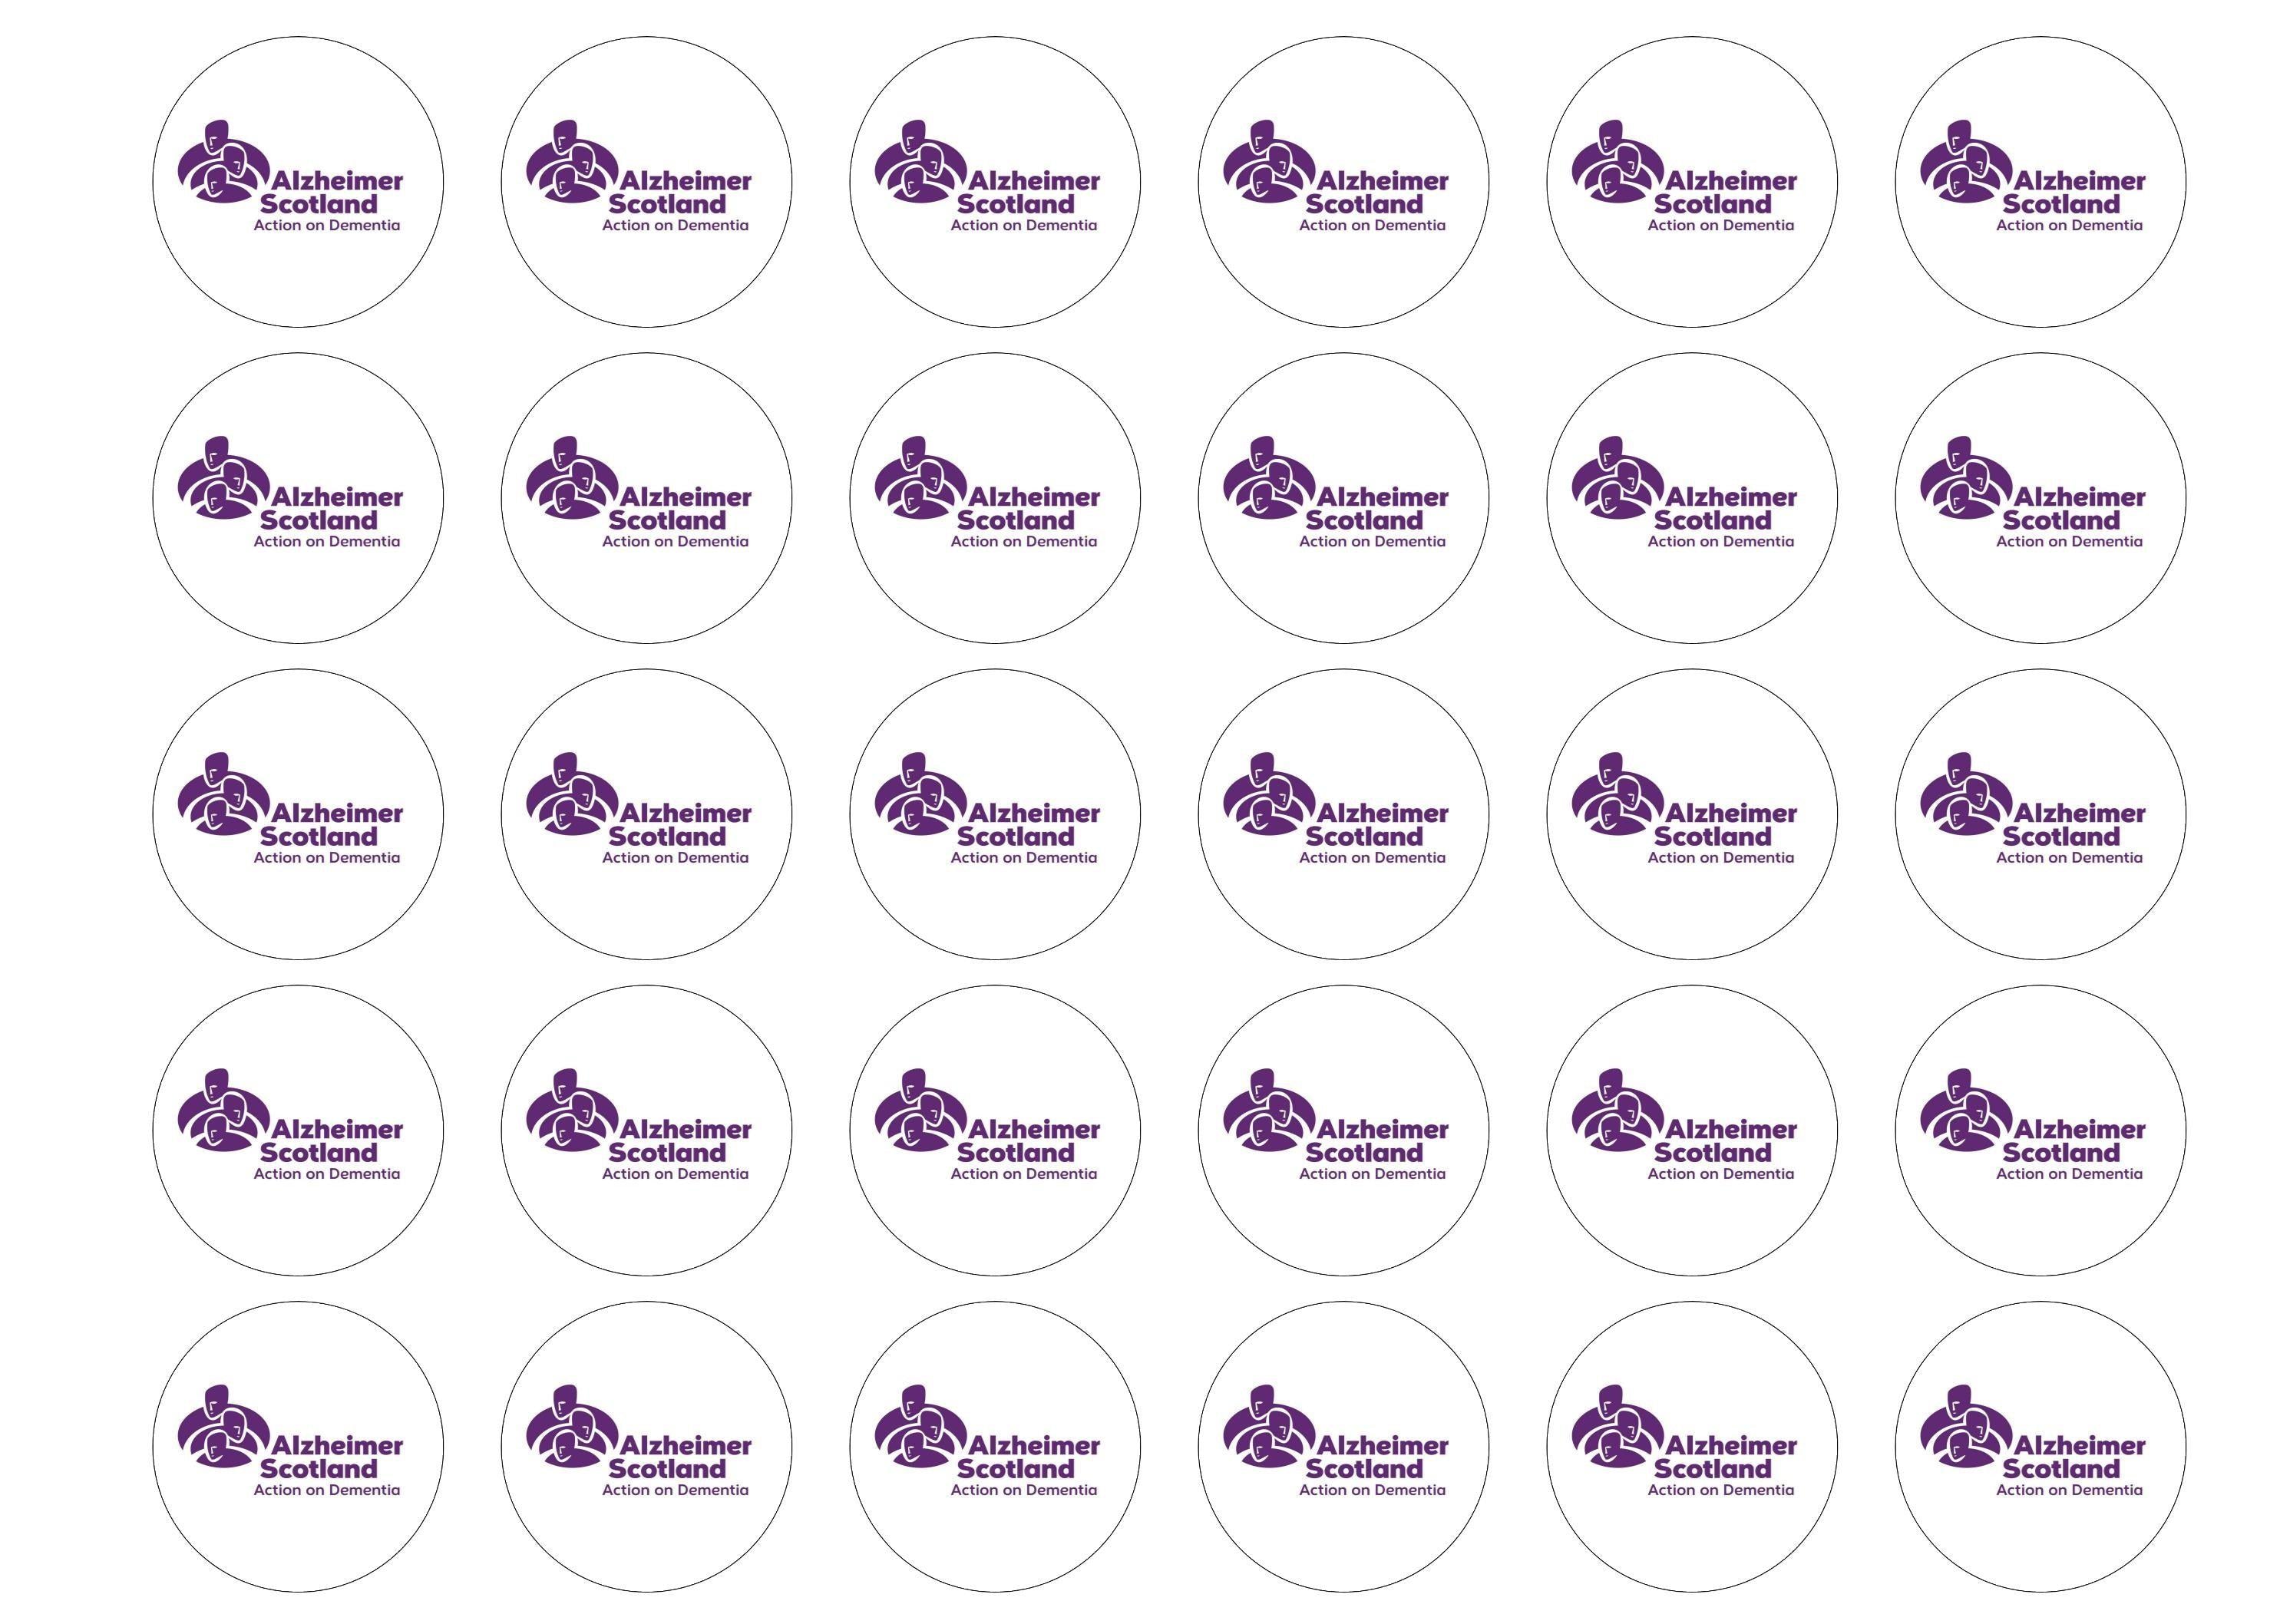 Printed edible cupcake toppers is support of Alzheimer Scotland